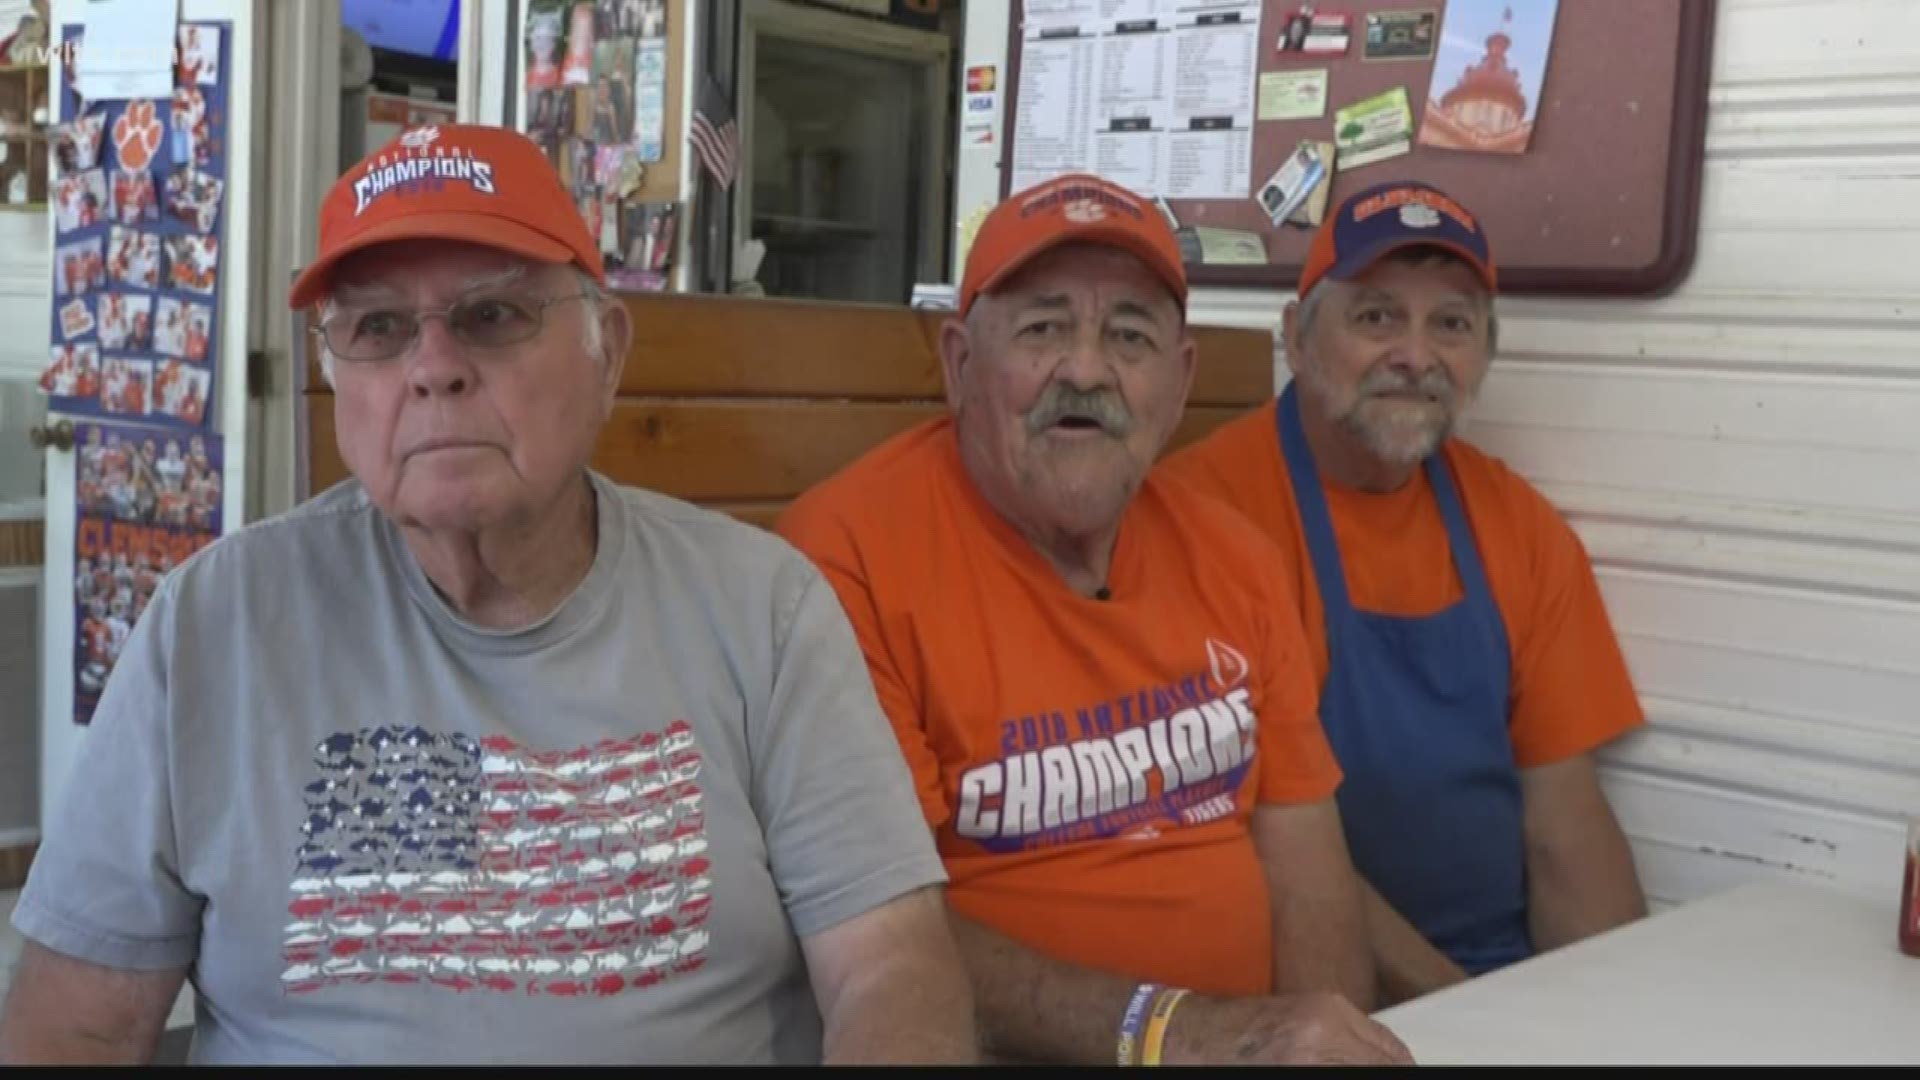 The Cannon brothers have owed Cannon's BBQ for the last 15 years but decided its time to call it quits